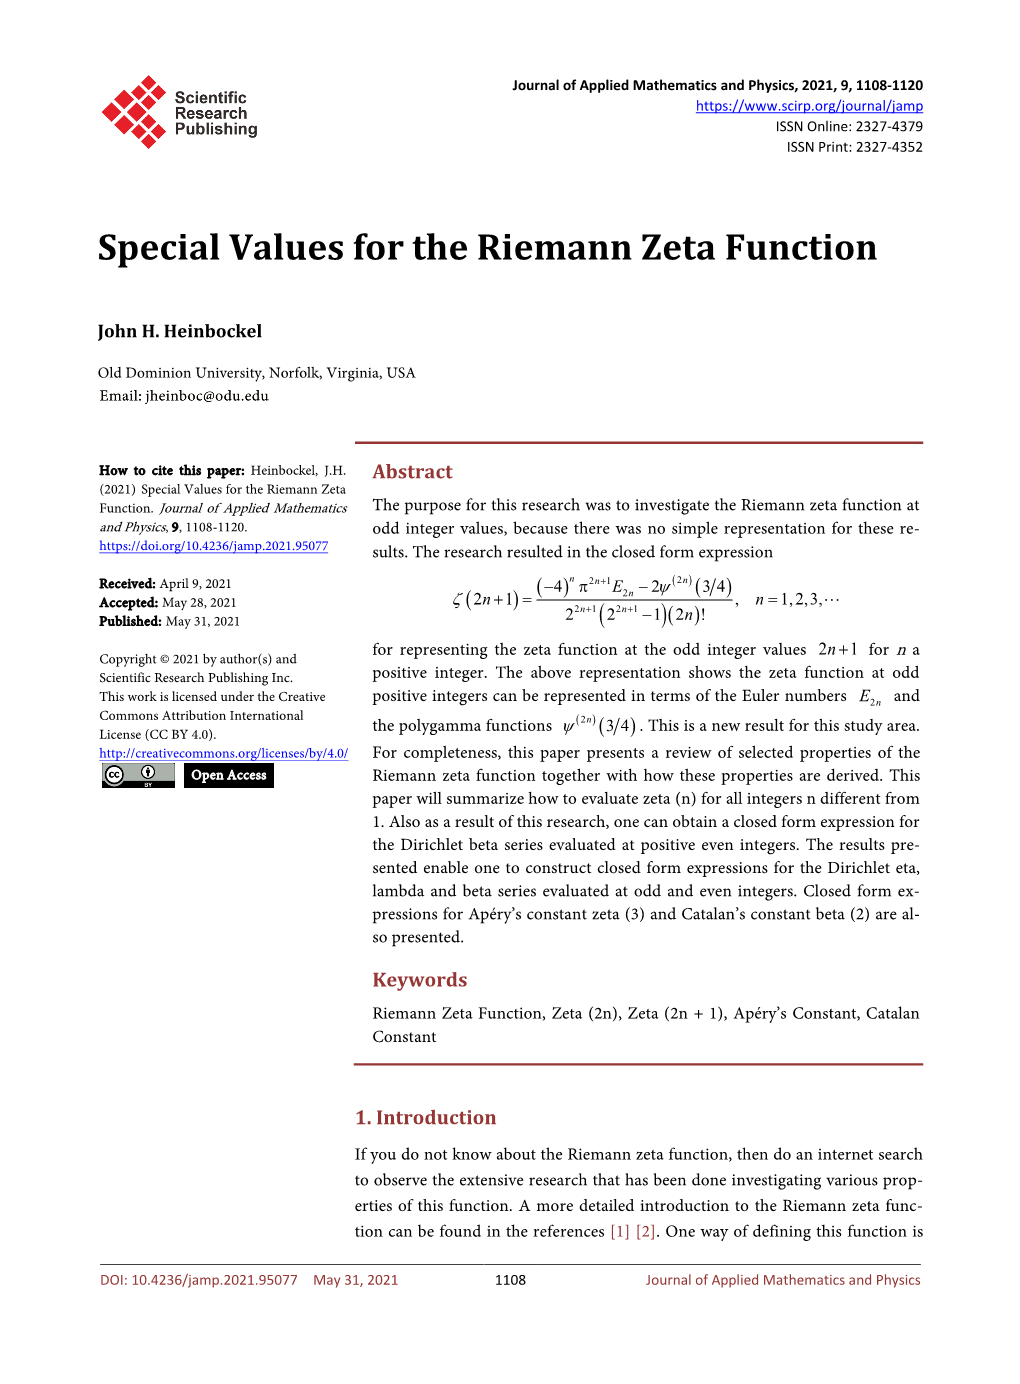 Special Values for the Riemann Zeta Function